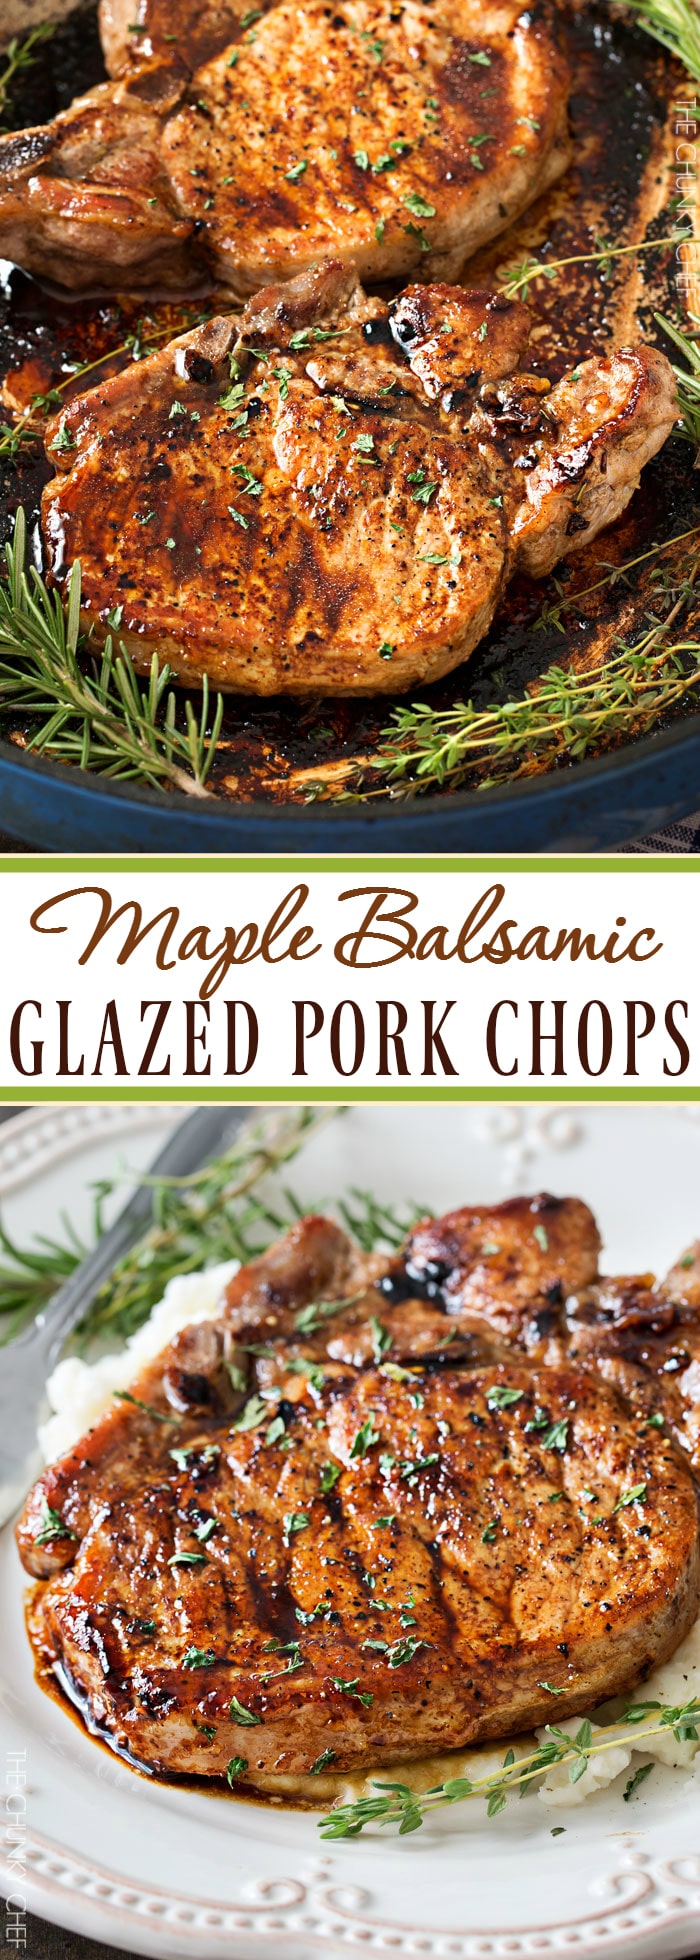 Maple Balsamic Glazed Pork Chops | Tender, juicy, bone-in glazed pork chops are seared and coated in a lip-smacking maple balsamic vinegar sauce! | http://thechunkychef.com